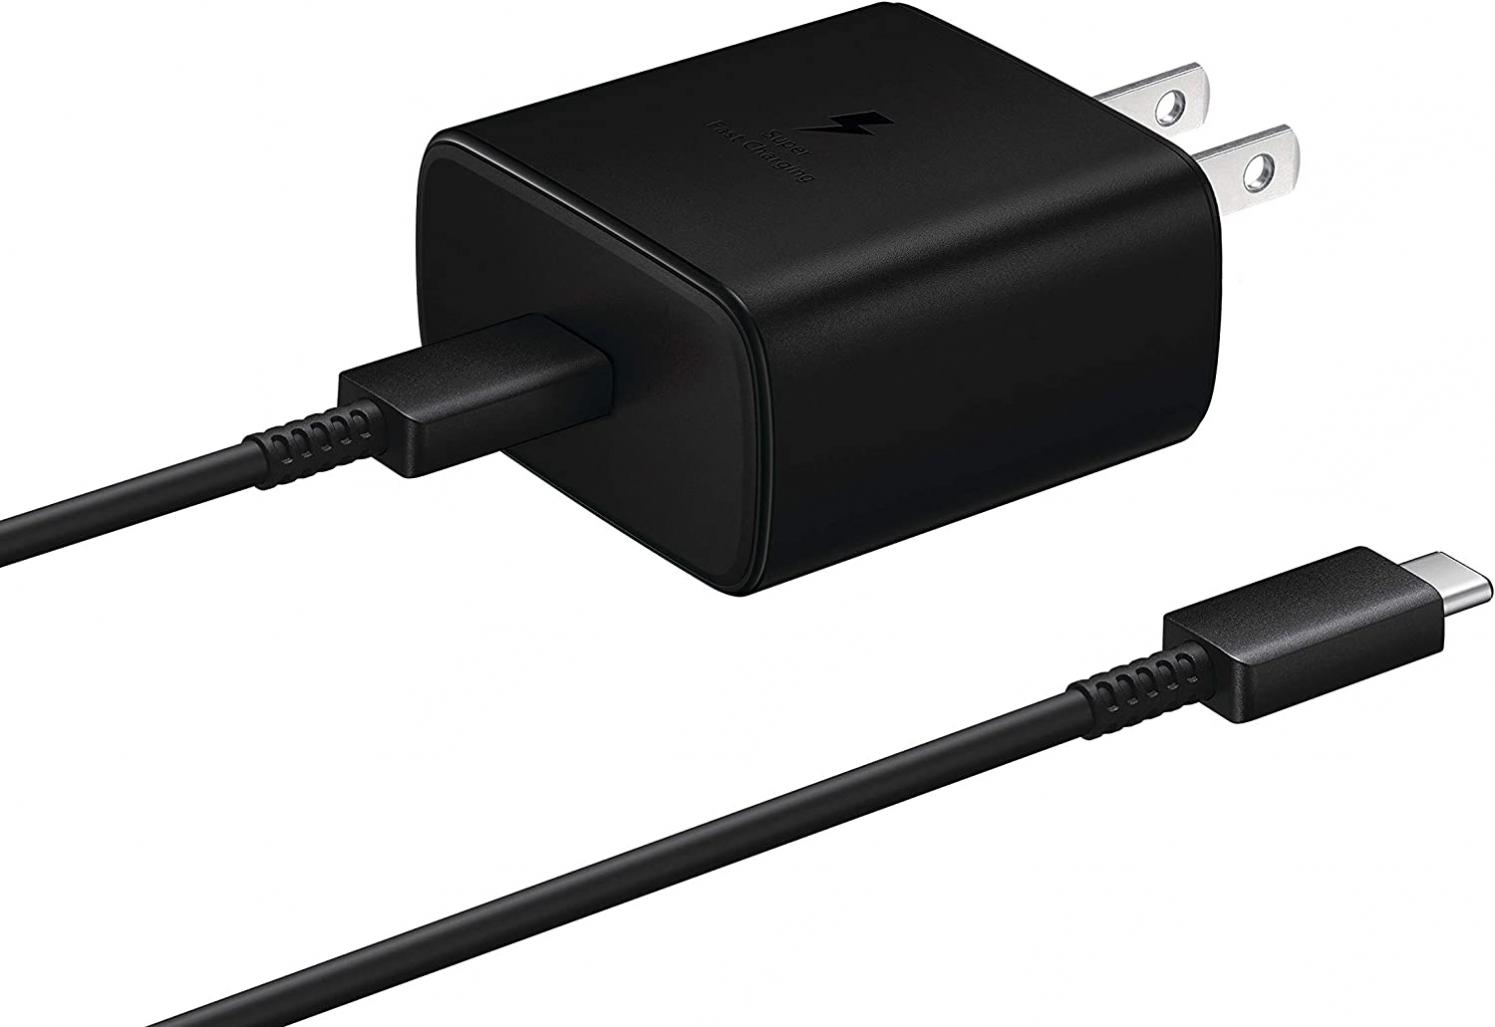 Samsung 45W USB-C Super Fast Charging Wall Charger - Black (US Version with Warranty), 45W TA w/ Cable, Black